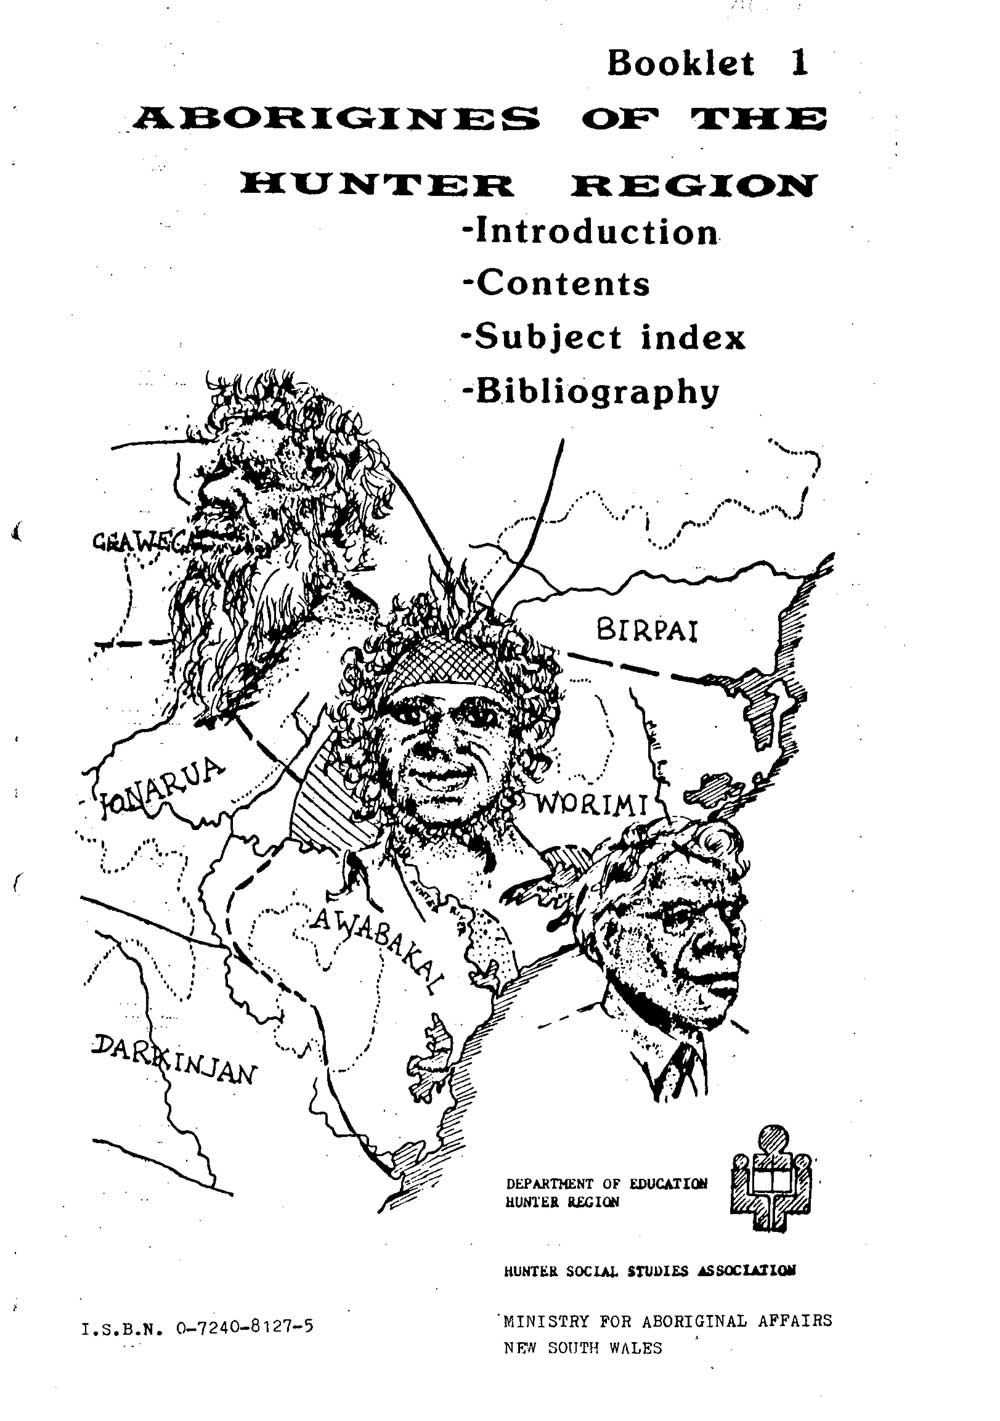 Cover of Aborigines of the Hunter Region Kit (2nd Edition)